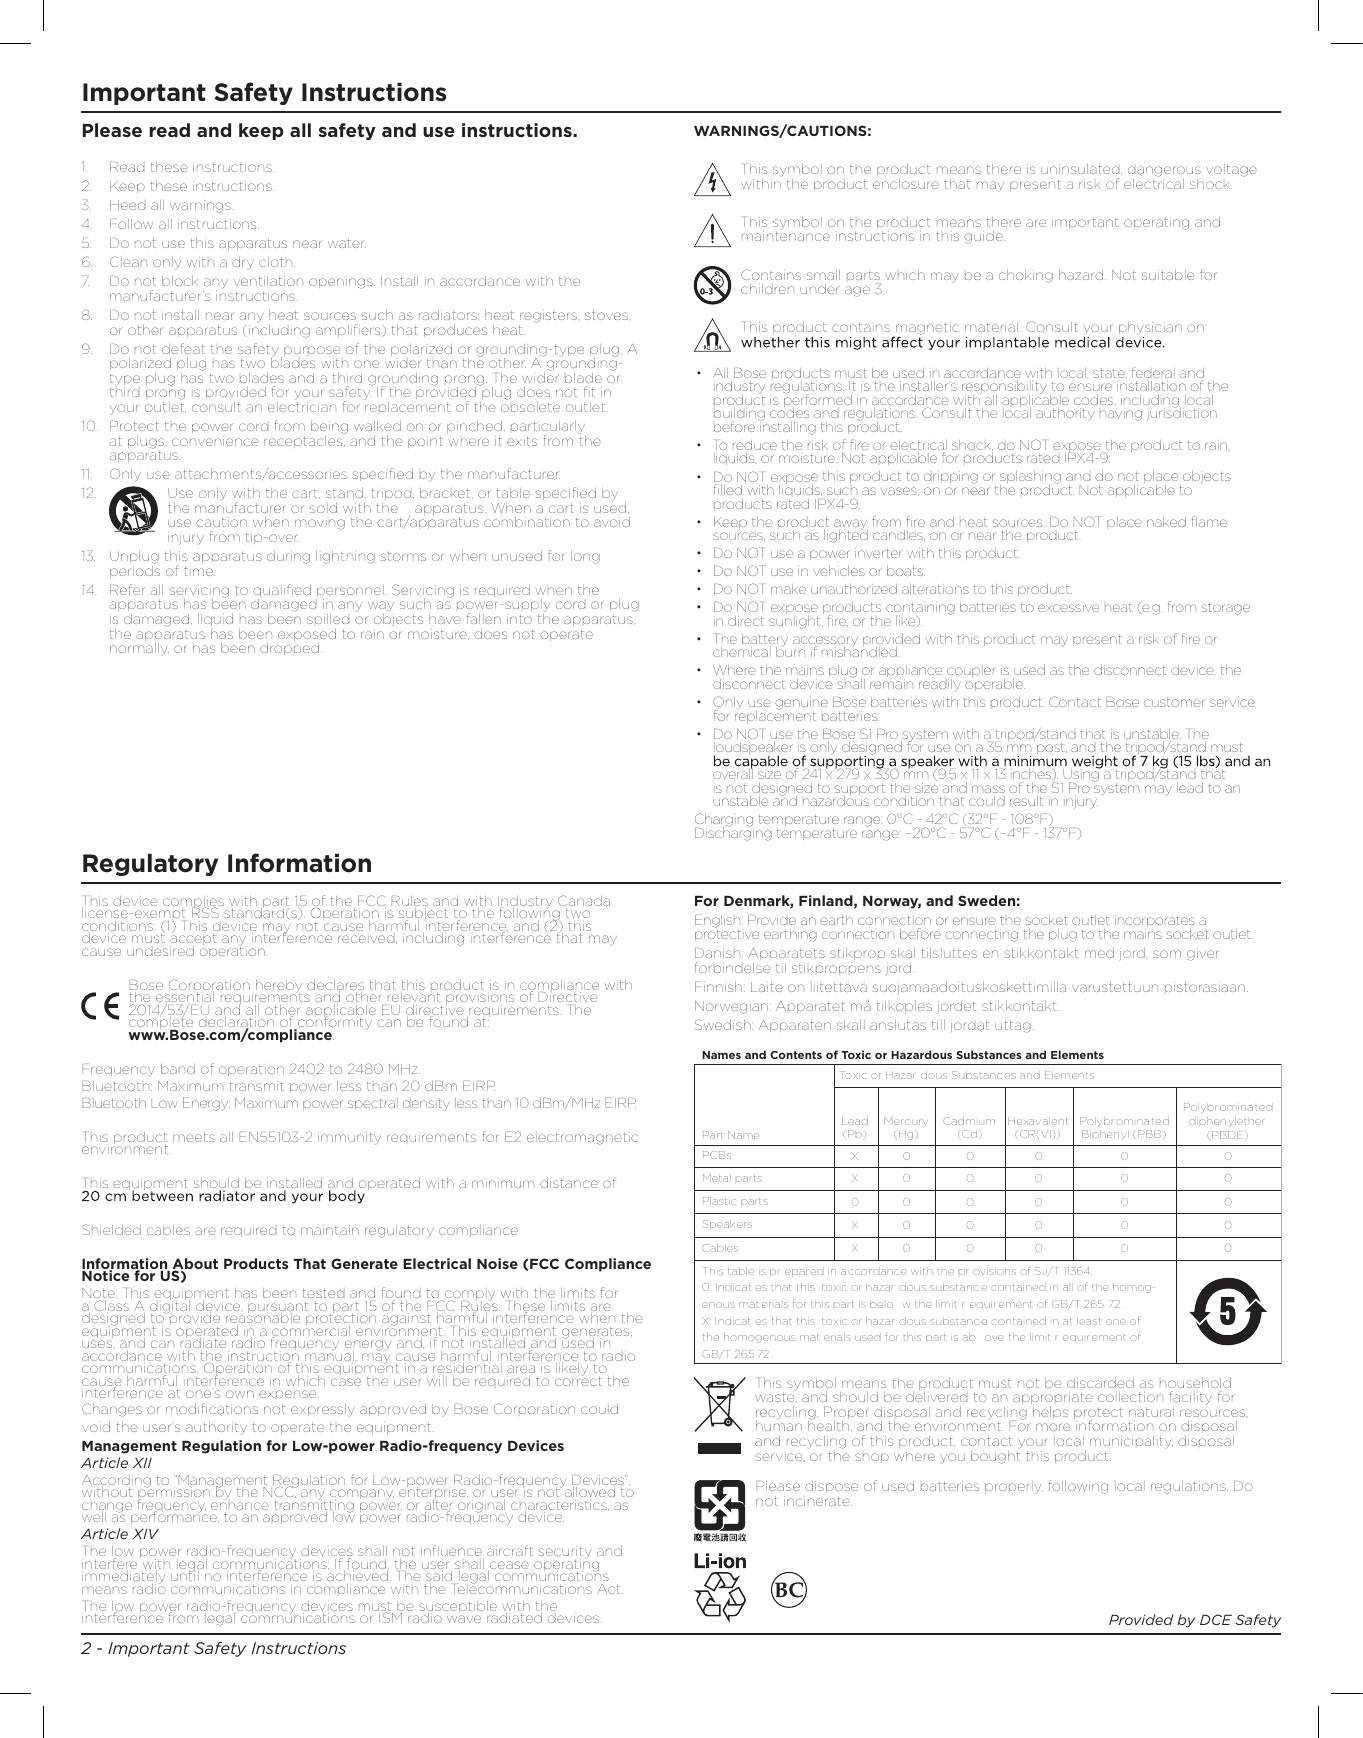 2 - Important Safety InstructionsImportant Safety InstructionsThis device complies with part 15 of the FCC Rules and with Industry Canada license-exempt RSS standard(s). Operation is subject to the following two conditions: (1) This device may not cause harmful interference, and (2) this device must accept any interference received, including interference that may cause undesired operation.Bose Corporation hereby declares that this product is in compliance with the essential requirements and other relevant provisions of Directive 2014/53/EU and all other applicable EU directive requirements. The complete declaration of conformity can be found at:   www.Bose.com/compliance.Frequency band of operation 2402 to 2480 MHz.Bluetooth: Maximum transmit power less than 20 dBm EIRP.Bluetooth Low Energy: Maximum power spectral density less than 10 dBm/MHz EIRP.This product meets all EN55103-2 immunity requirements for E2 electromagnetic environment.This equipment should be installed and operated with a minimum distance of Shielded cables are required to maintain regulatory complianceInformation About Products That Generate Electrical Noise (FCC Compliance Notice for US)Note: This equipment has been tested and found to comply with the limits for a Class A digital device, pursuant to part 15 of the FCC Rules. These limits are designed to provide reasonable protection against harmful interference when the equipment is operated in a commercial environment. This equipment generates, uses, and can radiate radio frequency energy and, if not installed and used in accordance with the instruction manual, may cause harmful interference to radio communications. Operation of this equipment in a residential area is likely to cause harmful interference in which case the user will be required to correct the interference at one’s own expense.Management Regulation for Low-power Radio-frequency DevicesArticle XIIAccording to “Management Regulation for Low-power Radio-frequency Devices”, without permission by the NCC, any company, enterprise, or user is not allowed to change frequency, enhance transmitting power, or alter original characteristics, as well as performance, to an approved low power radio-frequency device.Article XIVThe low power radio-frequency devices shall not inﬂuence aircraft security and interfere with legal communications; If found, the user shall cease operating immediately until no interference is achieved. The said legal communications means radio communications in compliance with the Telecommunications Act.The low power radio-frequency devices must be susceptible with the interference from legal communications or ISM radio wave radiated devices.•  All Bose products must be used in accordance with local, state, federal and industry regulations. It is the installer’s responsibility to ensure installation of the product is performed in accordance with all applicable codes, including local building codes and regulations. Consult the local authority having jurisdiction before installing this product.•  To reduce the risk of ﬁre or electrical shock, do NOT expose the product to rain, liquids, or moisture. Not applicable for products rated IPX4-9.•  Do NOT expose this product to dripping or splashing and do not place objects ﬁlled with liquids, such as vases, on or near the product. Not applicable to products rated IPX4-9.•  Keep the product away from ﬁre and heat sources. Do NOT place naked ﬂame sources, such as lighted candles, on or near the product.•  Do NOT use a power inverter with this product.•  Do NOT use in vehicles or boats.•  Do NOT make unauthorized alterations to this product.•  Do NOT expose products containing batteries to excessive heat (e.g. from storage in direct sunlight, ﬁre, or the like).•  The battery accessory provided with this product may present a risk of ﬁre or chemical burn if mishandled.•  Where the mains plug or appliance coupler is used as the disconnect device, the disconnect device shall remain readily operable.•  Only use genuine Bose batteries with this product. Contact Bose customer service for replacement batteries.•  Do NOT use the Bose S1 Pro system with a tripod/stand that is unstable. The loudspeaker is only designed for use on a 35 mm post, and the tripod/stand must overall size of 241 x 279 x 330 mm (9.5 x 11 x 13 inches). Using a tripod/stand that is not designed to support the size and mass of the S1 Pro system may lead to an unstable and hazardous condition that could result in injury.Charging temperature range: 0°C - 42°C (32°F - 108°F)  Discharging temperature range: –20°C - 57°C (–4°F - 137°F)1.  Read these instructions.2.  Keep these instructions.3.   Heed all warnings.4.  Follow all instructions.5.  Do not use this apparatus near water.6.  Clean only with a dry cloth.7.   Do not block any ventilation openings. Install in accordance with the manufacturer’s instructions.8.  Do not install near any heat sources such as radiators, heat registers, stoves, or other apparatus (including ampliﬁers) that produces heat. 9.  Do not defeat the safety purpose of the polarized or grounding-type plug. A polarized plug has two blades with one wider than the other. A grounding-type plug has two blades and a third grounding prong. The wider blade or third prong is provided for your safety. If the provided plug does not ﬁt in your outlet, consult an electrician for replacement of the obsolete outlet.10.  Protect the power cord from being walked on or pinched, particularly at plugs, convenience receptacles, and the point where it exits from the apparatus.11.   Only use attachments/accessories speciﬁed by the manufacturer.12.   Use only with the cart, stand, tripod, bracket, or table speciﬁed by the manufacturer or sold with the   apparatus. When a cart is used, use caution when moving the cart/apparatus combination to avoid injury from tip-over.13.   Unplug this apparatus during lightning storms or when unused for long periods of time.14.   Refer all servicing to qualiﬁed personnel. Servicing is required when the apparatus has been damaged in any way such as power-supply cord or plug is damaged, liquid has been spilled or objects have fallen into the apparatus, the apparatus has been exposed to rain or moisture, does not operate normally, or has been dropped.For Denmark, Finland, Norway, and Sweden:English: Provide an earth connection or ensure the socket outlet incorporates a protective earthing connection before connecting the plug to the mains socket outlet.Danish: Apparatets stikprop skal tilsluttes en stikkontakt med jord, som giver forbindelse til stikproppens jord.Finnish: Laite on liitettävä suojamaadoituskoskettimilla varustettuun pistorasiaan.Norwegian: Apparatet må tilkoples jordet stikkontakt.Swedish: Apparaten skall anslutas till jordat uttag.Please read and keep all safety and use instructions.This symbol means the product must not be discarded as household waste, and should be delivered to an appropriate collection facility for recycling. Proper disposal and recycling helps protect natural resources, human health, and the environment. For more information on disposal and recycling of this product, contact your local municipality, disposal service, or the shop where you bought this product.Part NameToxic or Hazar dous Substances and ElementsNames and Contents of Toxic or Hazardous Substances and ElementsPCBsMetal partsPlastic partsSpeakersCablesThis table is pr epared in a ccordance with the pr ovisions of SJ/T 11364.0: Indicat es that this  toxic or hazar dous substance contained in all of the homog-enous materials for this part is belo w the limit r equir ement of GB/T 265 72.X: Indicat es that this  toxic or hazar dous substance contained in at least one of the homogenous mat erials used for this part is ab ove the limit r equirement of  GB/T 265 72.Lead(Pb)Mercury(Hg)Cadmium (Cd)Hexavalent(CR(VI))PolybrominatedBiphenyl (PBB)Polybrominateddiphenylether(PBDE)XX0 0000000000000000000000000XXPlease dispose of used batteries properly, following local regulations. Do not incinerate.Provided by DCE SafetyWARNINGS/CAUTIONS:This symbol on the product means there is uninsulated, dangerous voltage within the product enclosure that may present a risk of electrical shock.This symbol on the product means there are important operating and maintenance instructions in this guide.Contains small parts which may be a choking hazard. Not suitable for children under age 3.This product contains magnetic material. Consult your physician on Regulatory InformationChanges or modifications not expressly approved by Bose Corporation couldvoid the user’s authority to operate the equipment.